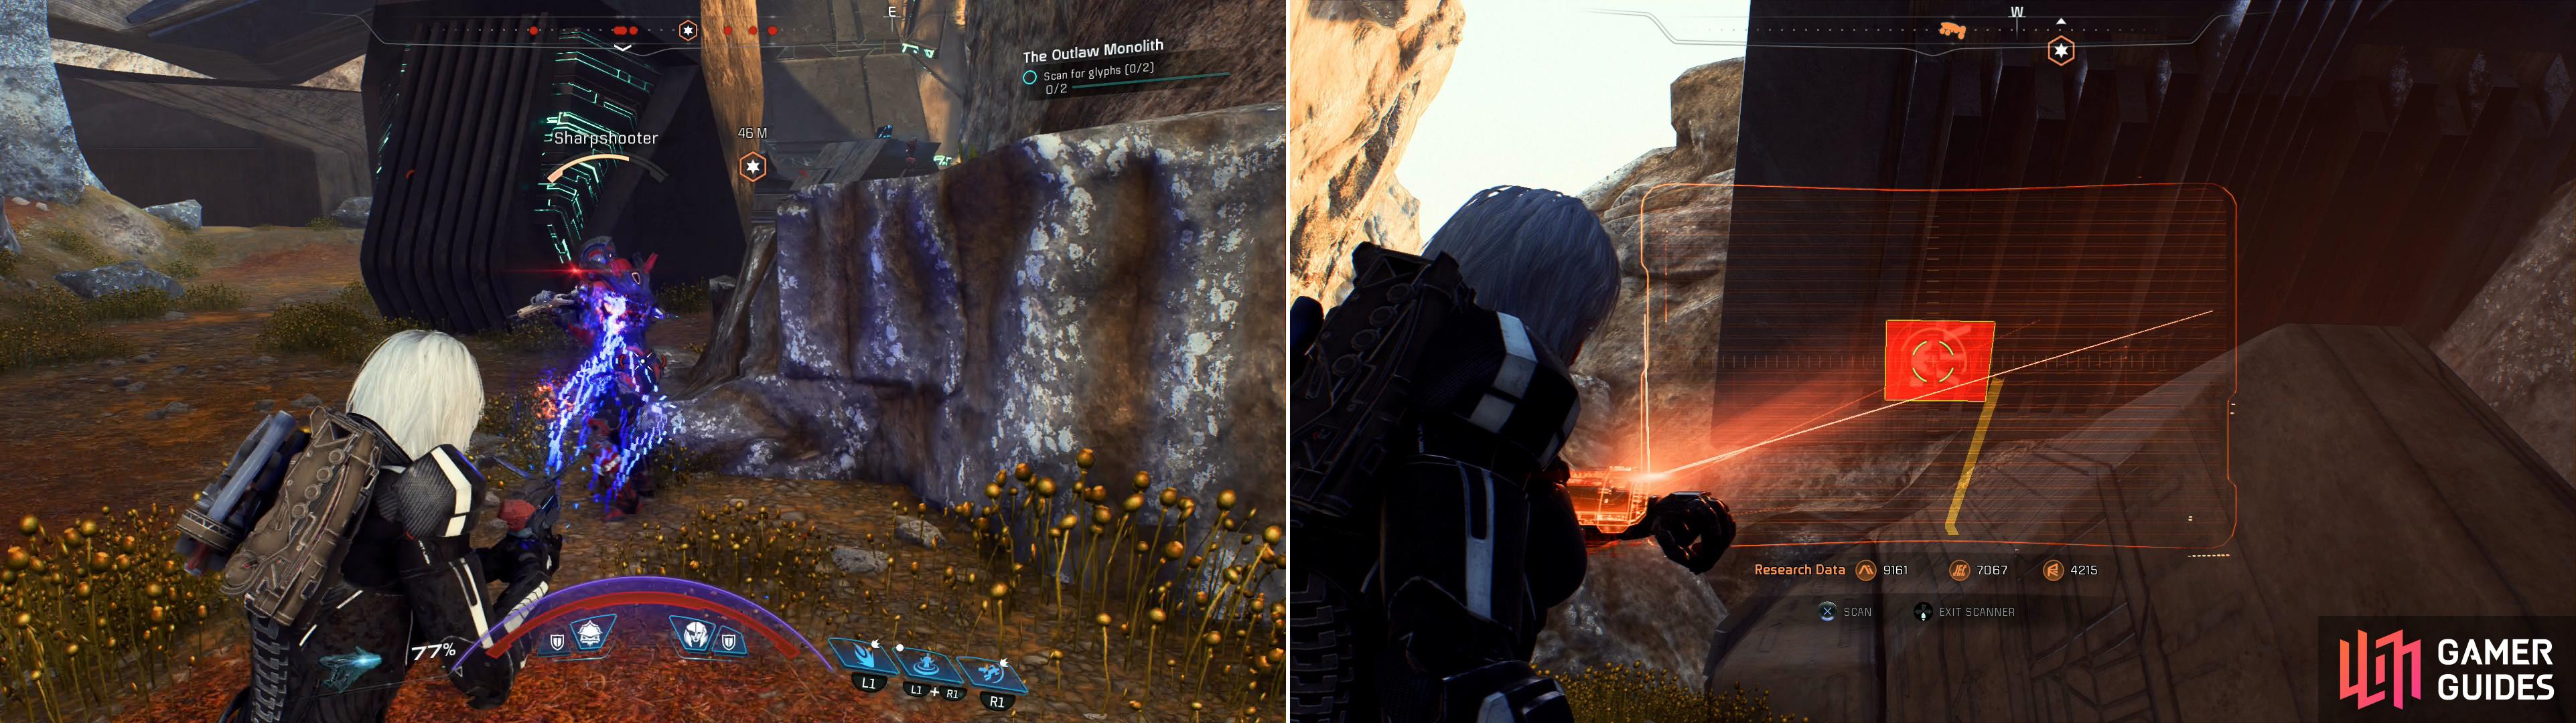 Kill the outlaws near the western monolith (left) then scan the glyphs to activate the monolith (right).